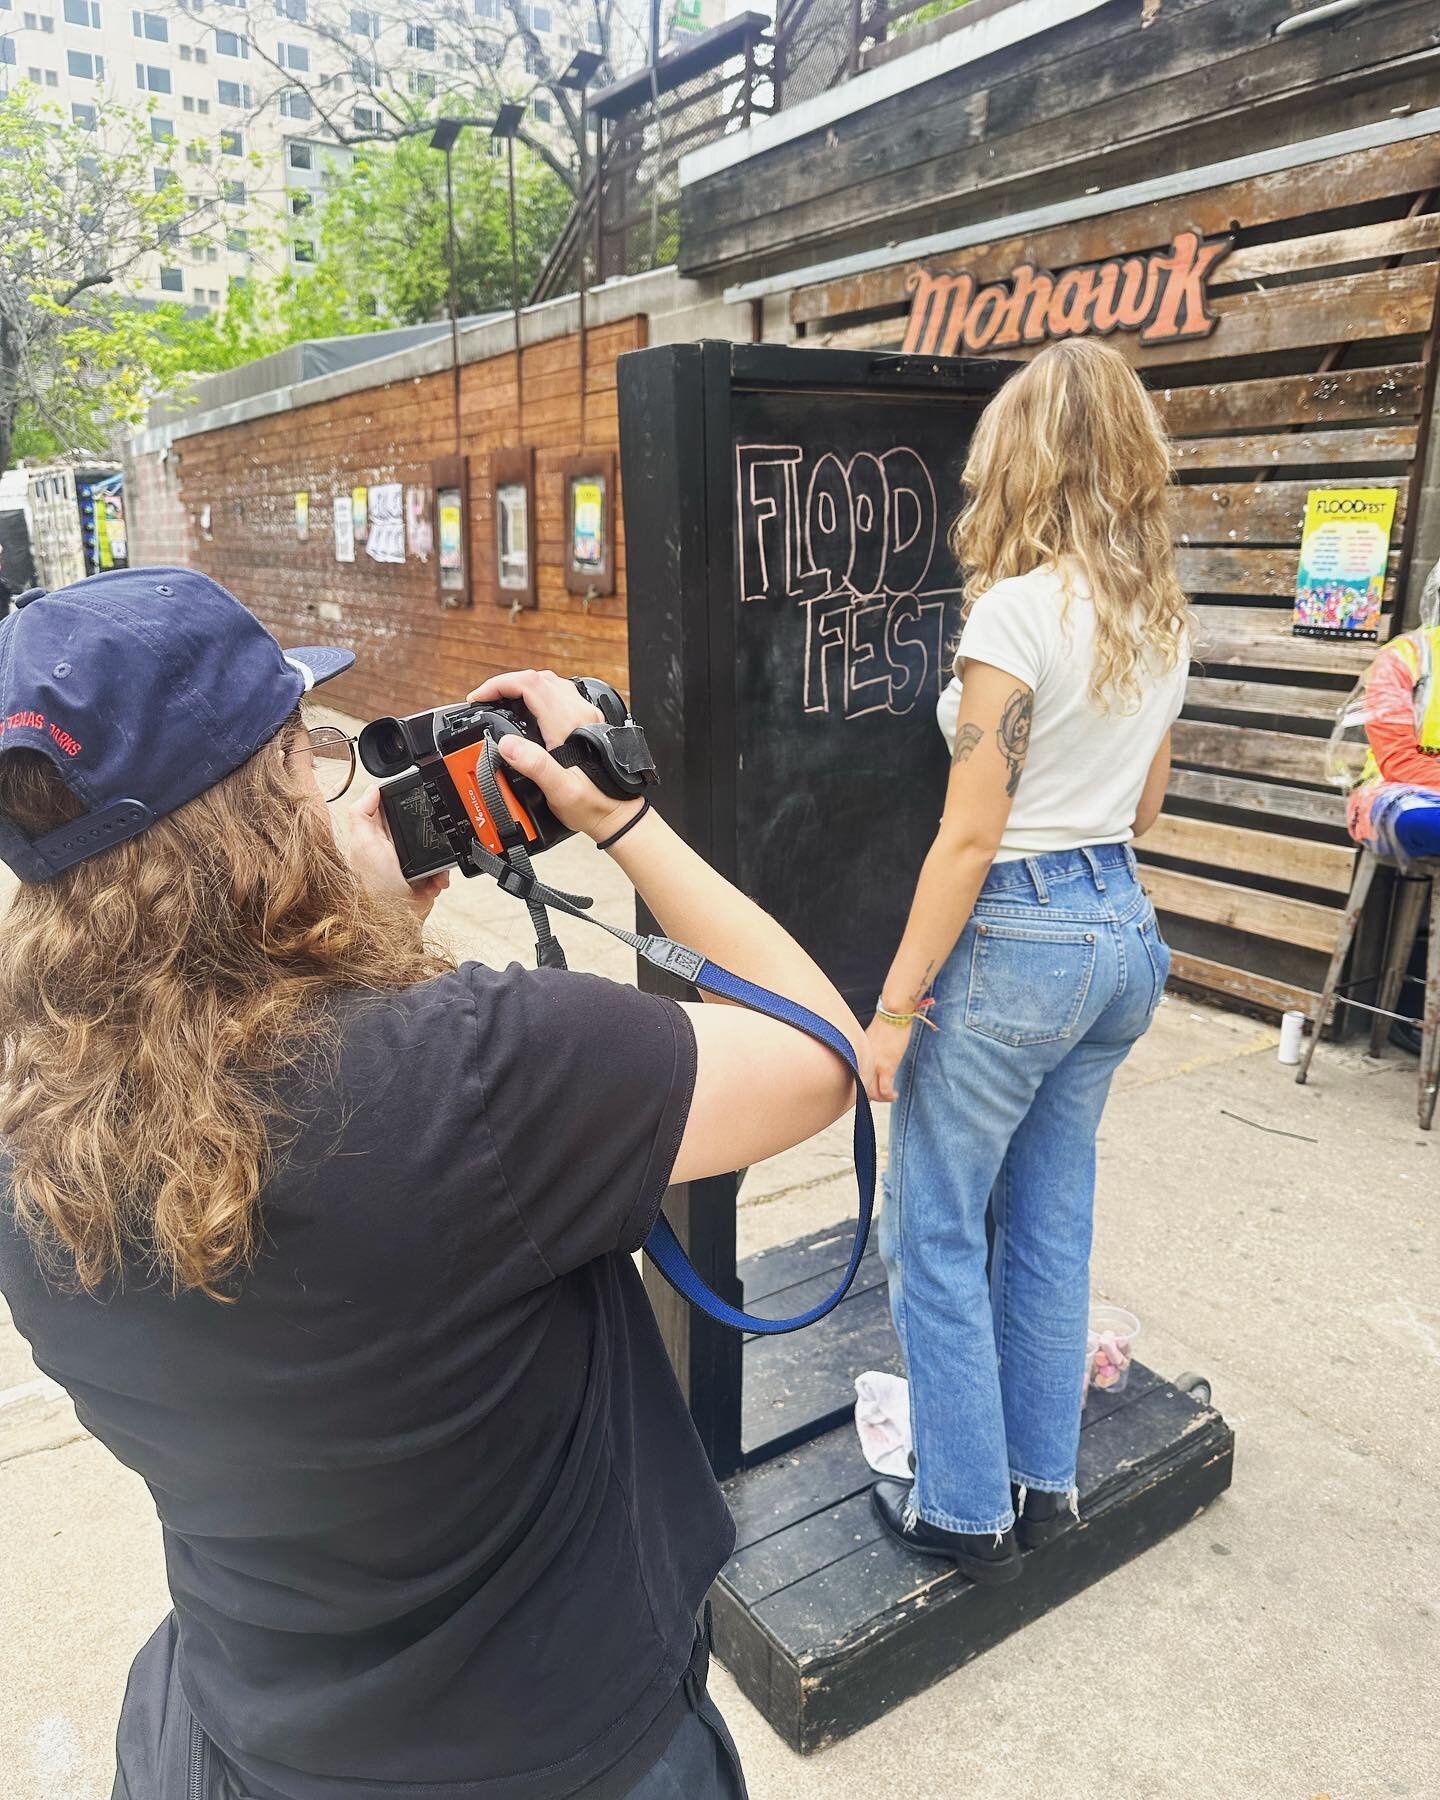 It was such a fun day sponsoring, shooting and catching up with so many friends @floodmagazine FLOODfest this year @mohawkaustin !!! Recap to come!